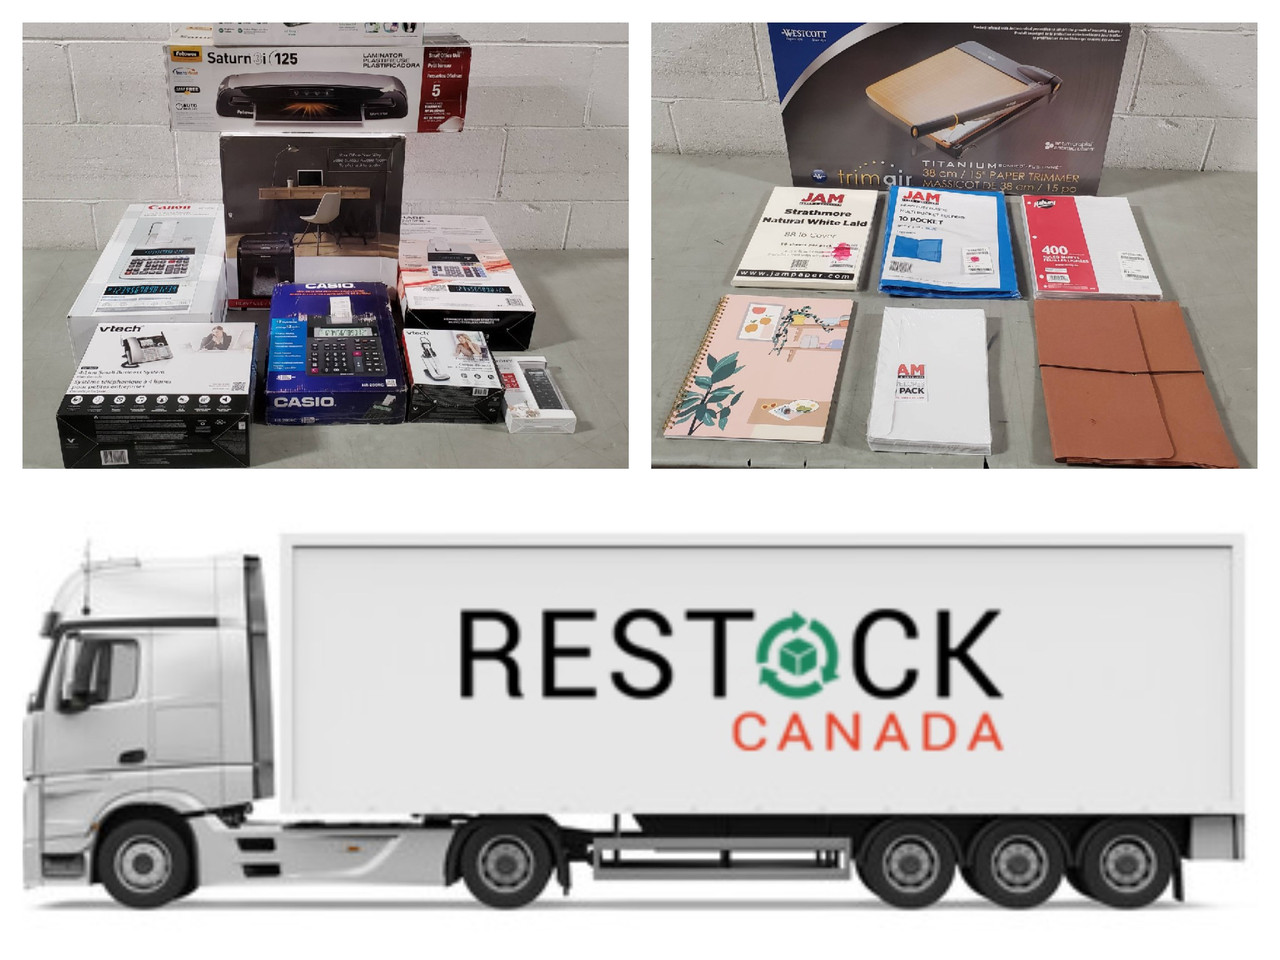 6569 Units of Business Products MSRP $154,117 Returns (Lot TK668001)  Restock Canada